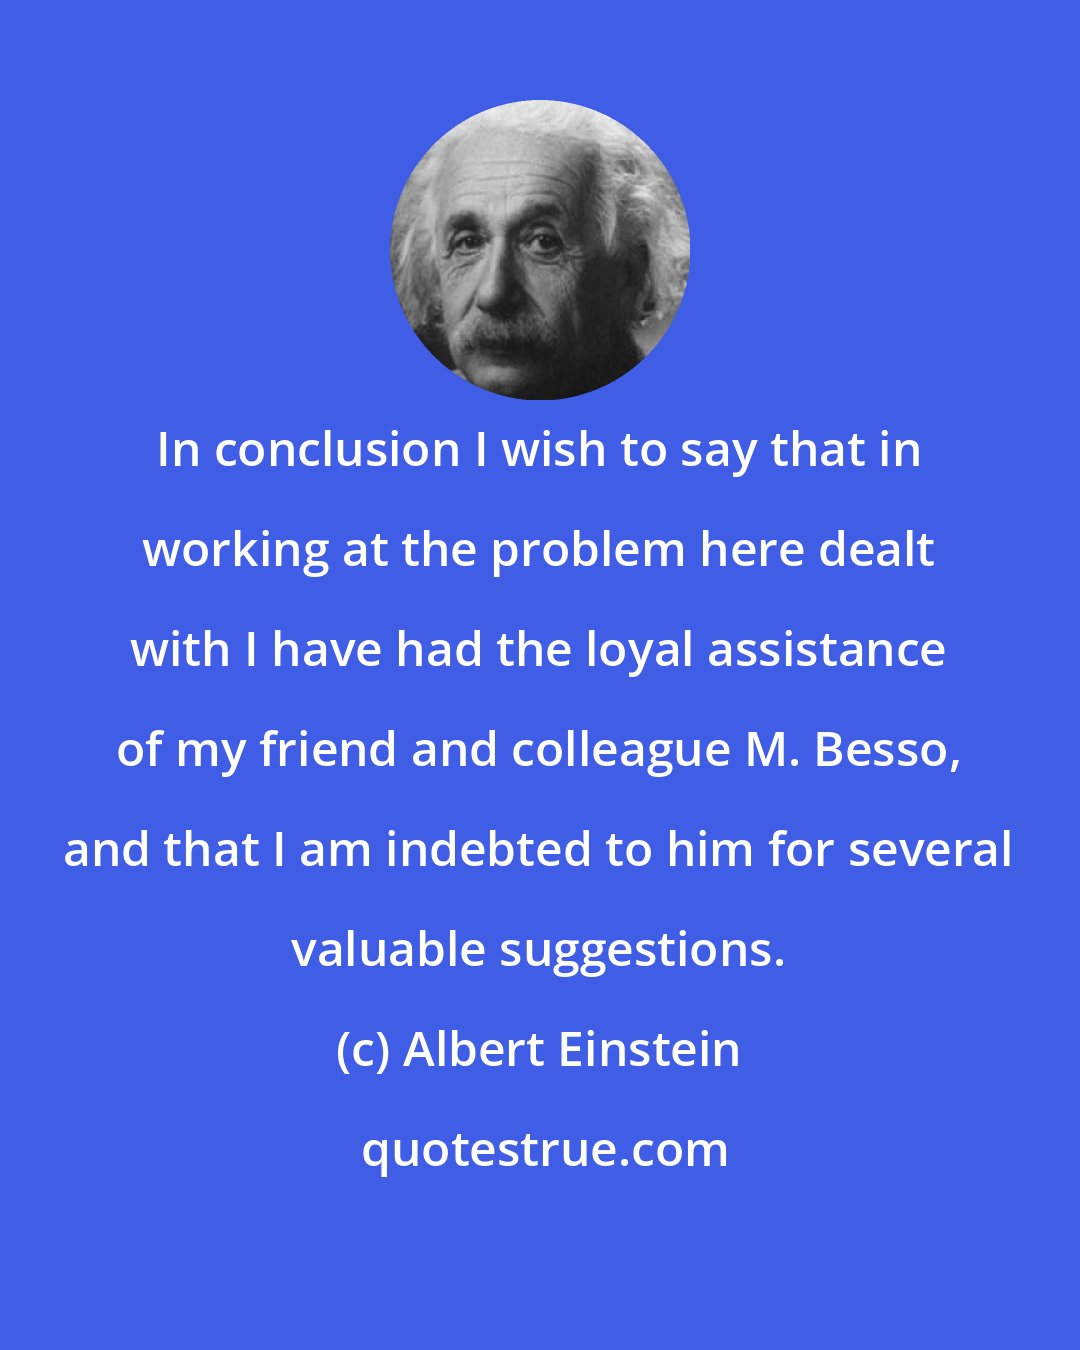 Albert Einstein: In conclusion I wish to say that in working at the problem here dealt with I have had the loyal assistance of my friend and colleague M. Besso, and that I am indebted to him for several valuable suggestions.